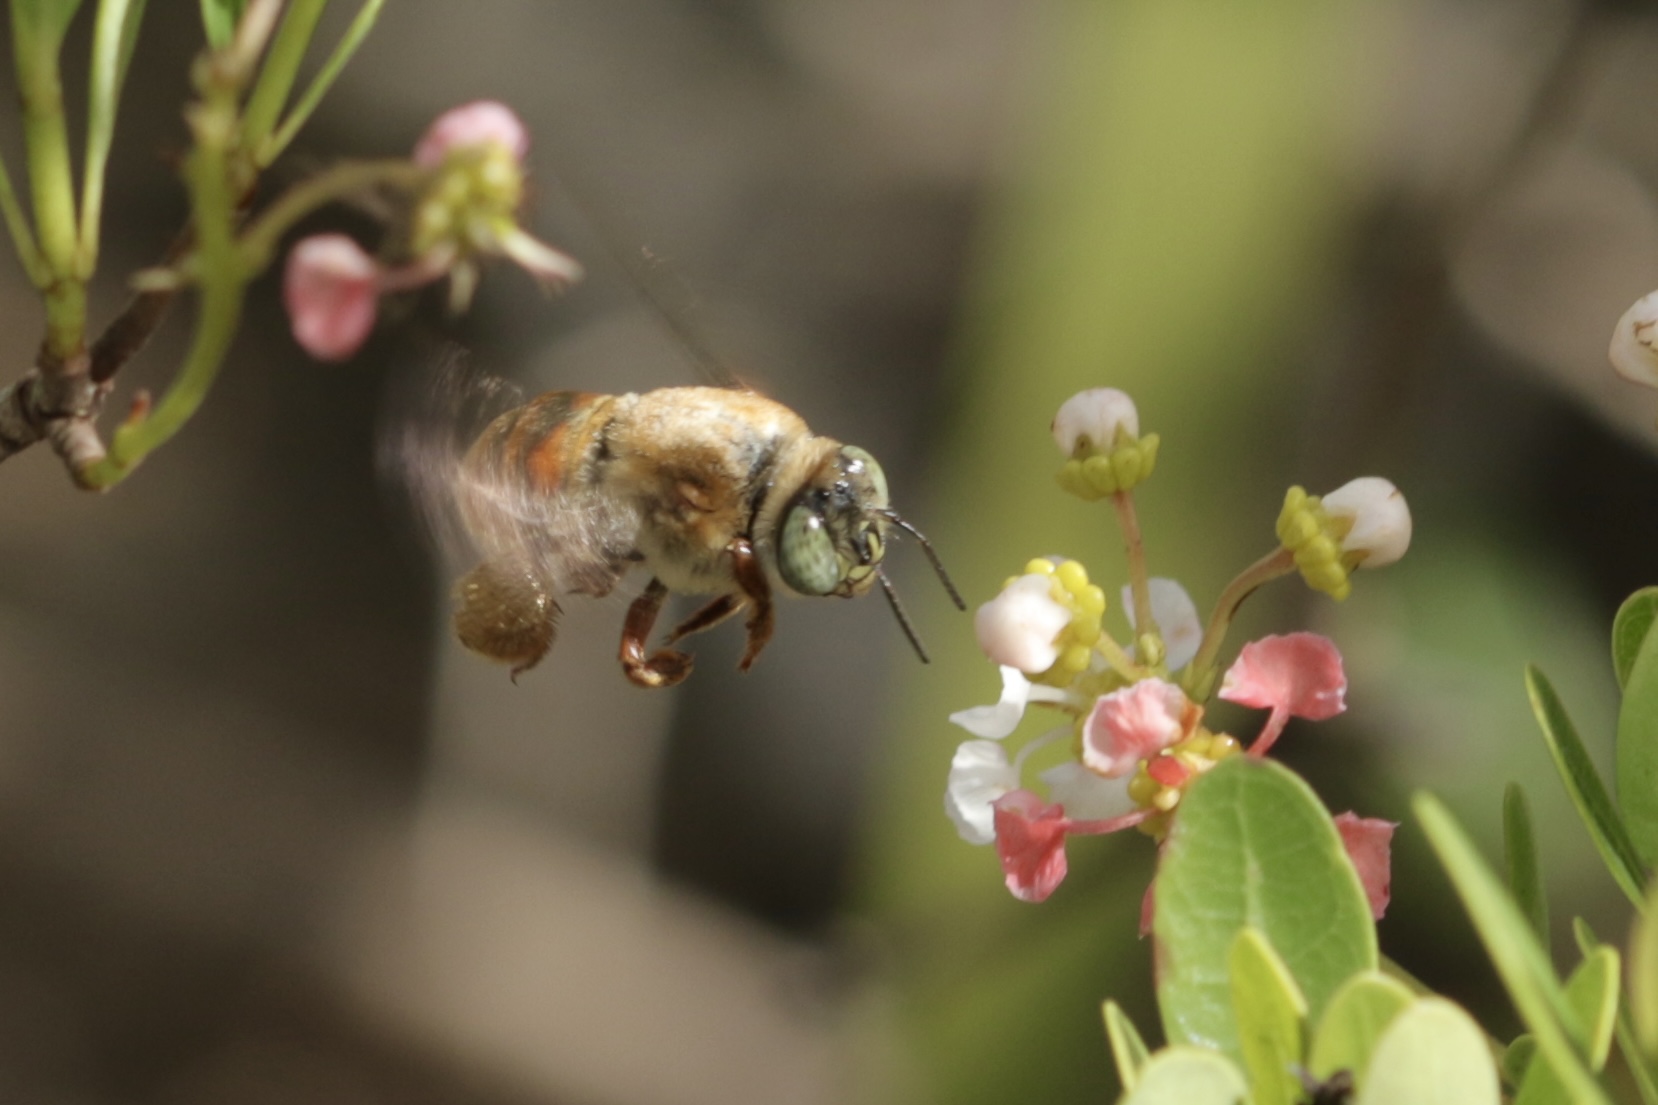 Image of An oil-collecting Wandering Centris Bee (Centris errans) visiting flowers of Locustberry (Byrsonima lucida) in the pine rockland habitat of South Florida.